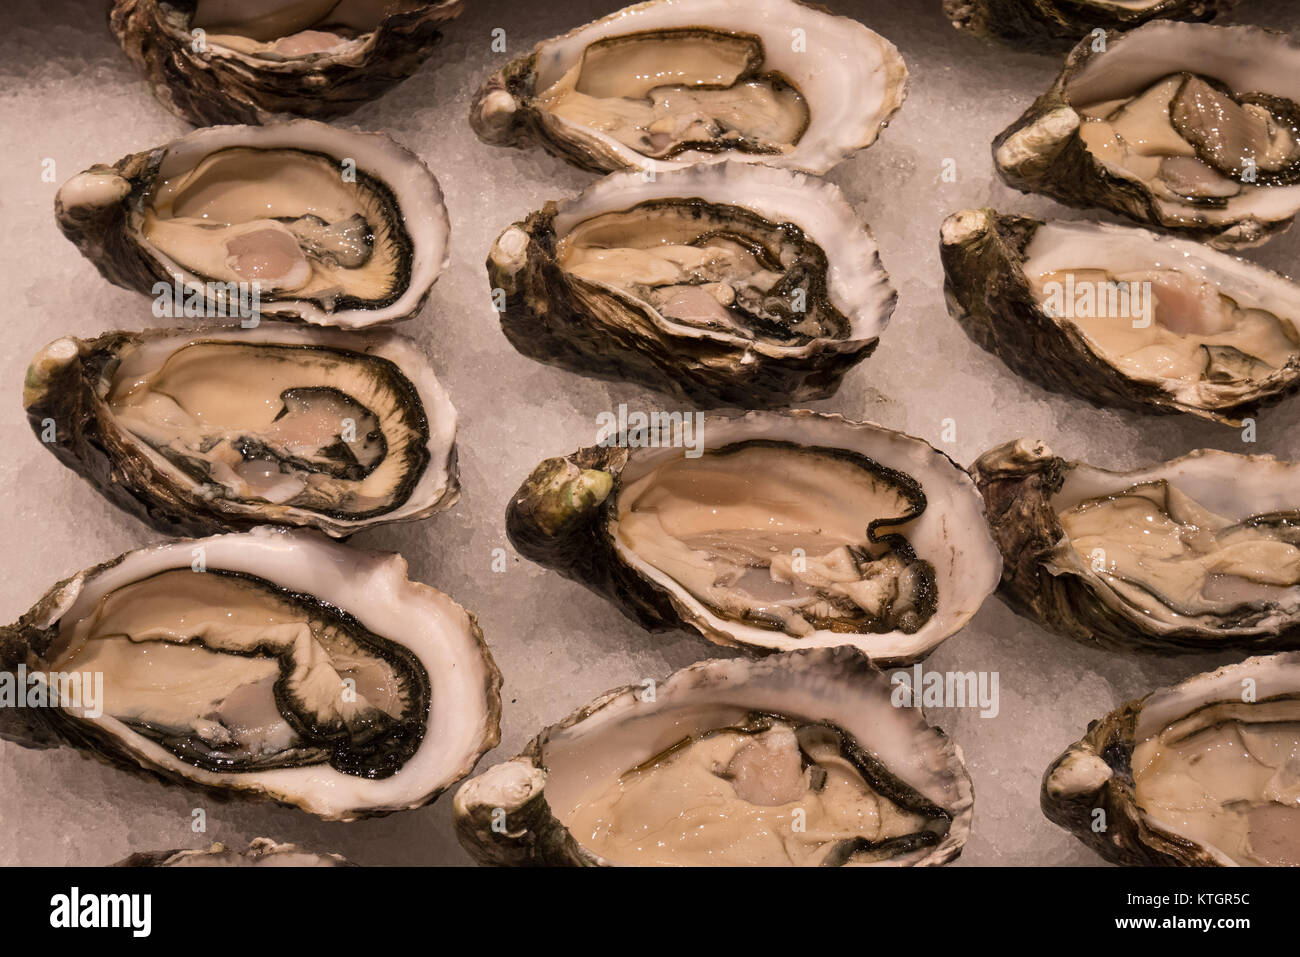 raw oysters in sydney seafood market Stock Photo